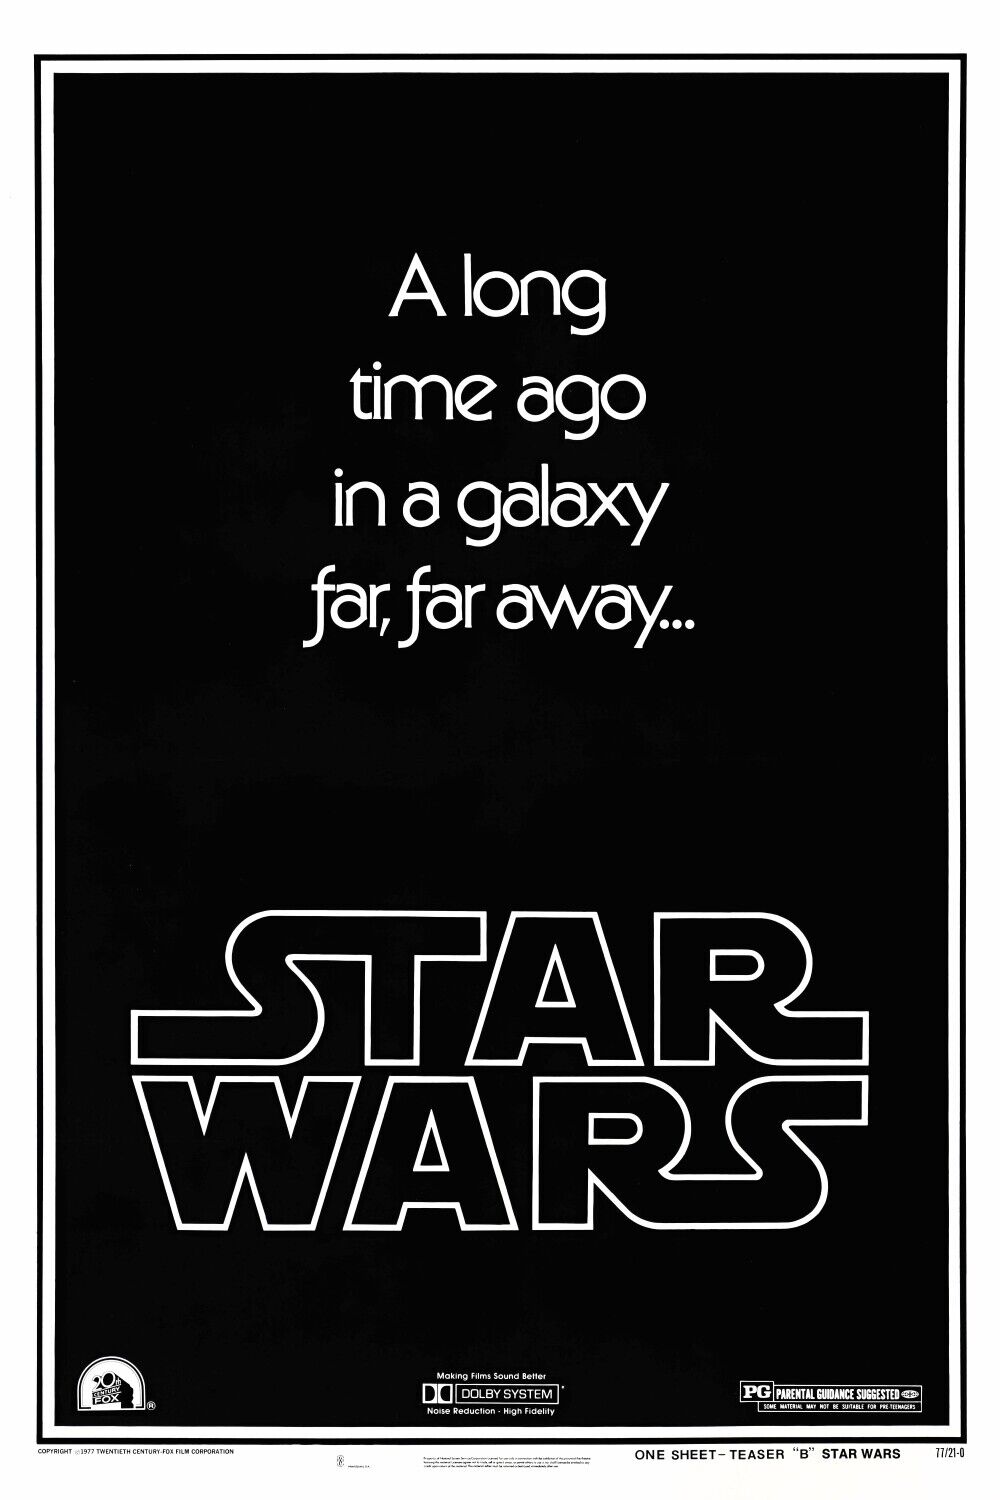 STAR WARS a long time ago in a galaxy Movie Poster Filmplakat